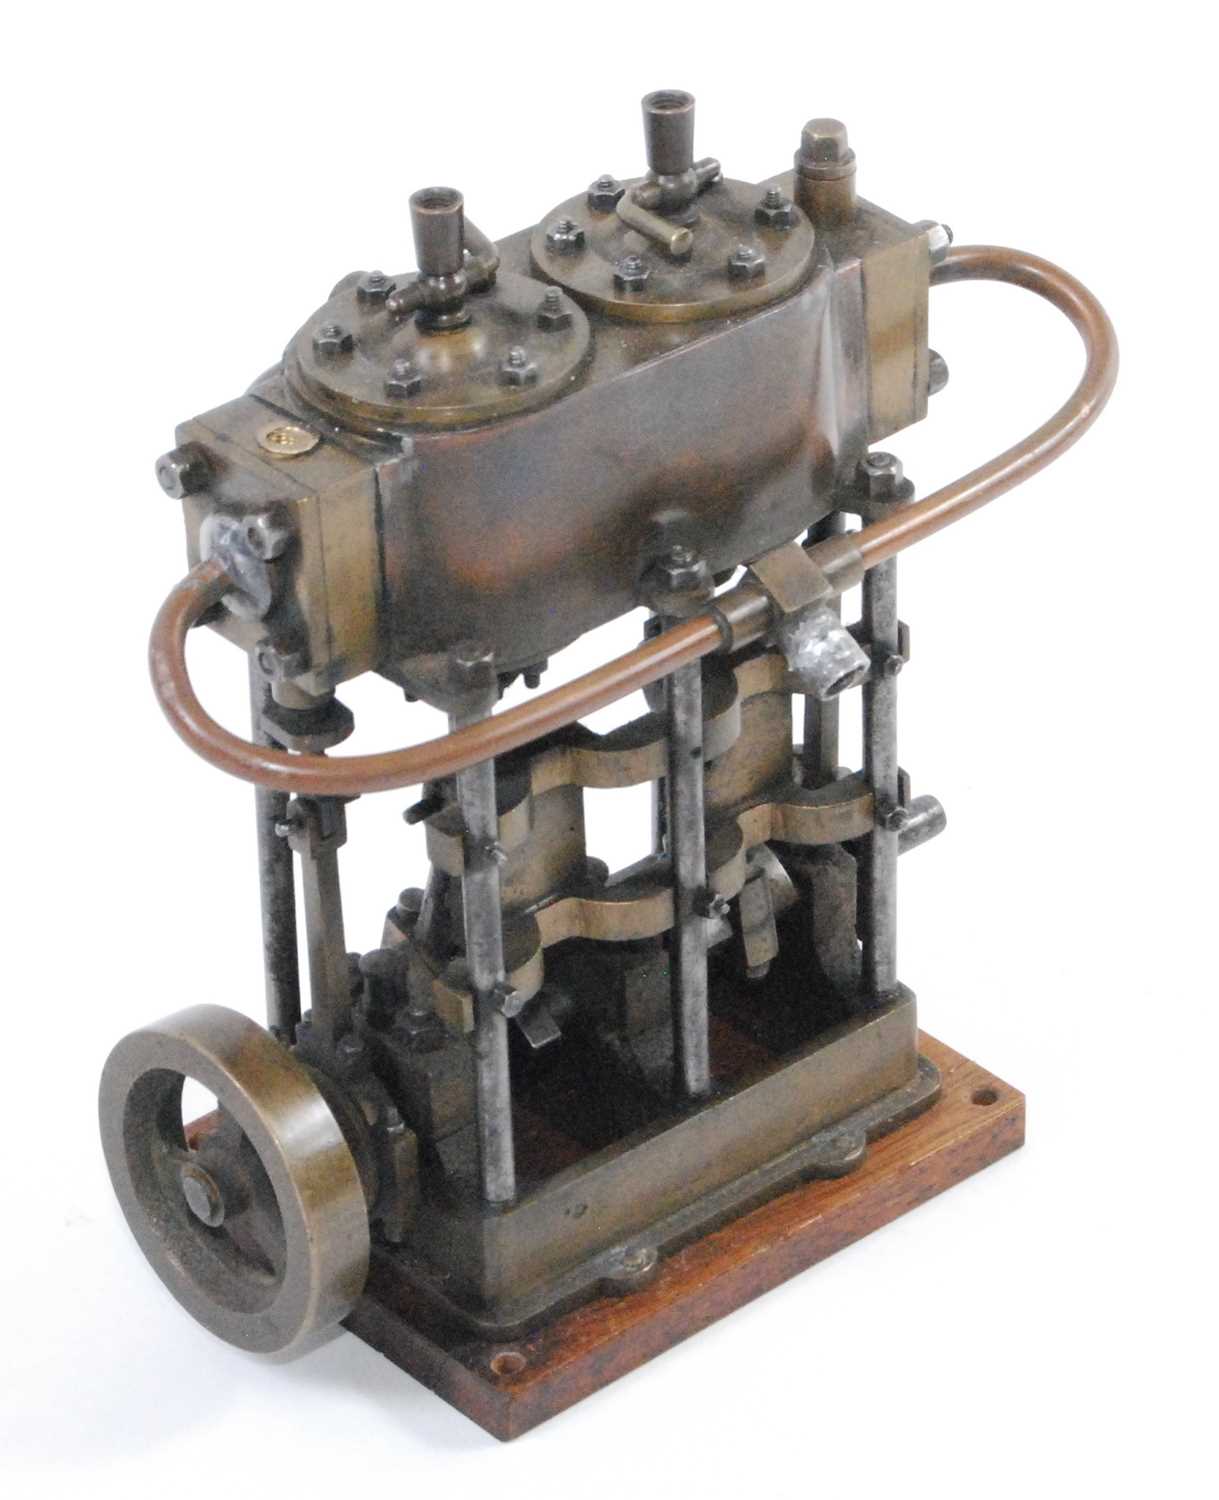 A very well-engineered stationary twin cylinder vertical steam plant, of brass and gun-metal